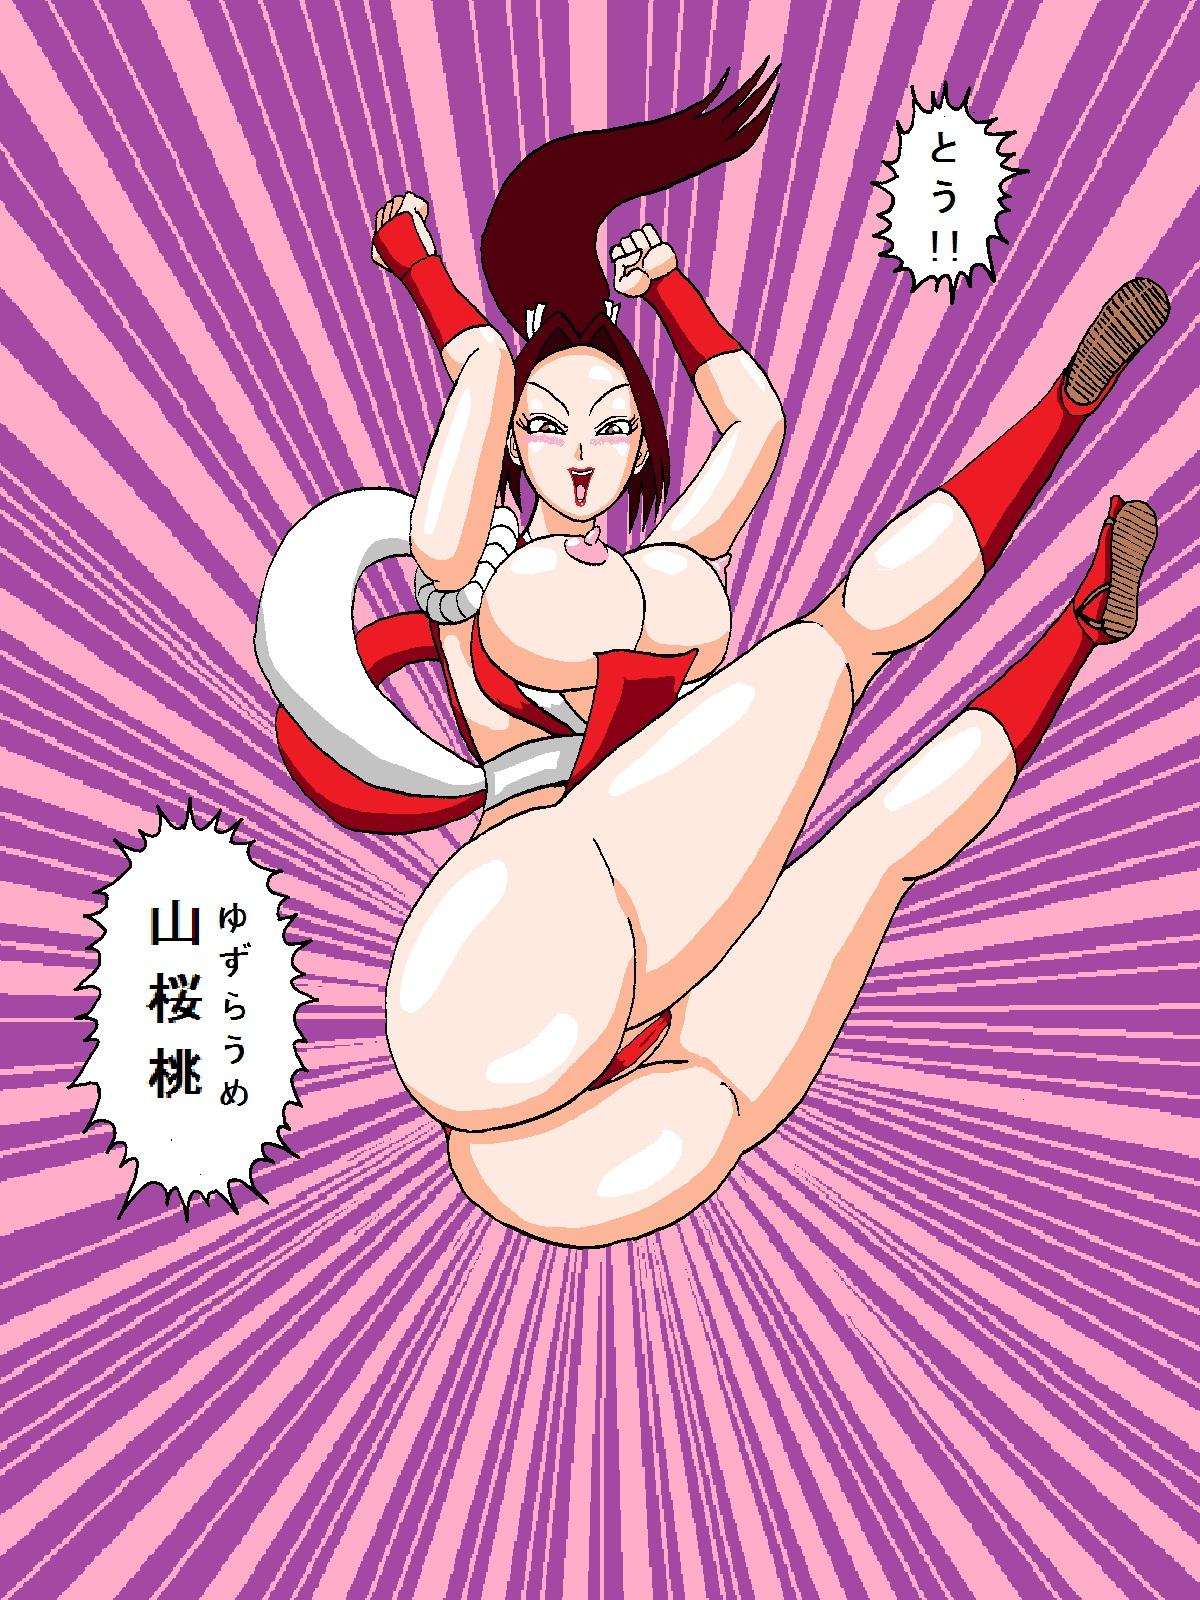 Costume [舞狩] Mai-chan vs Chris-kun (King of Fighters) - King of fighters Gaygroupsex - Page 10